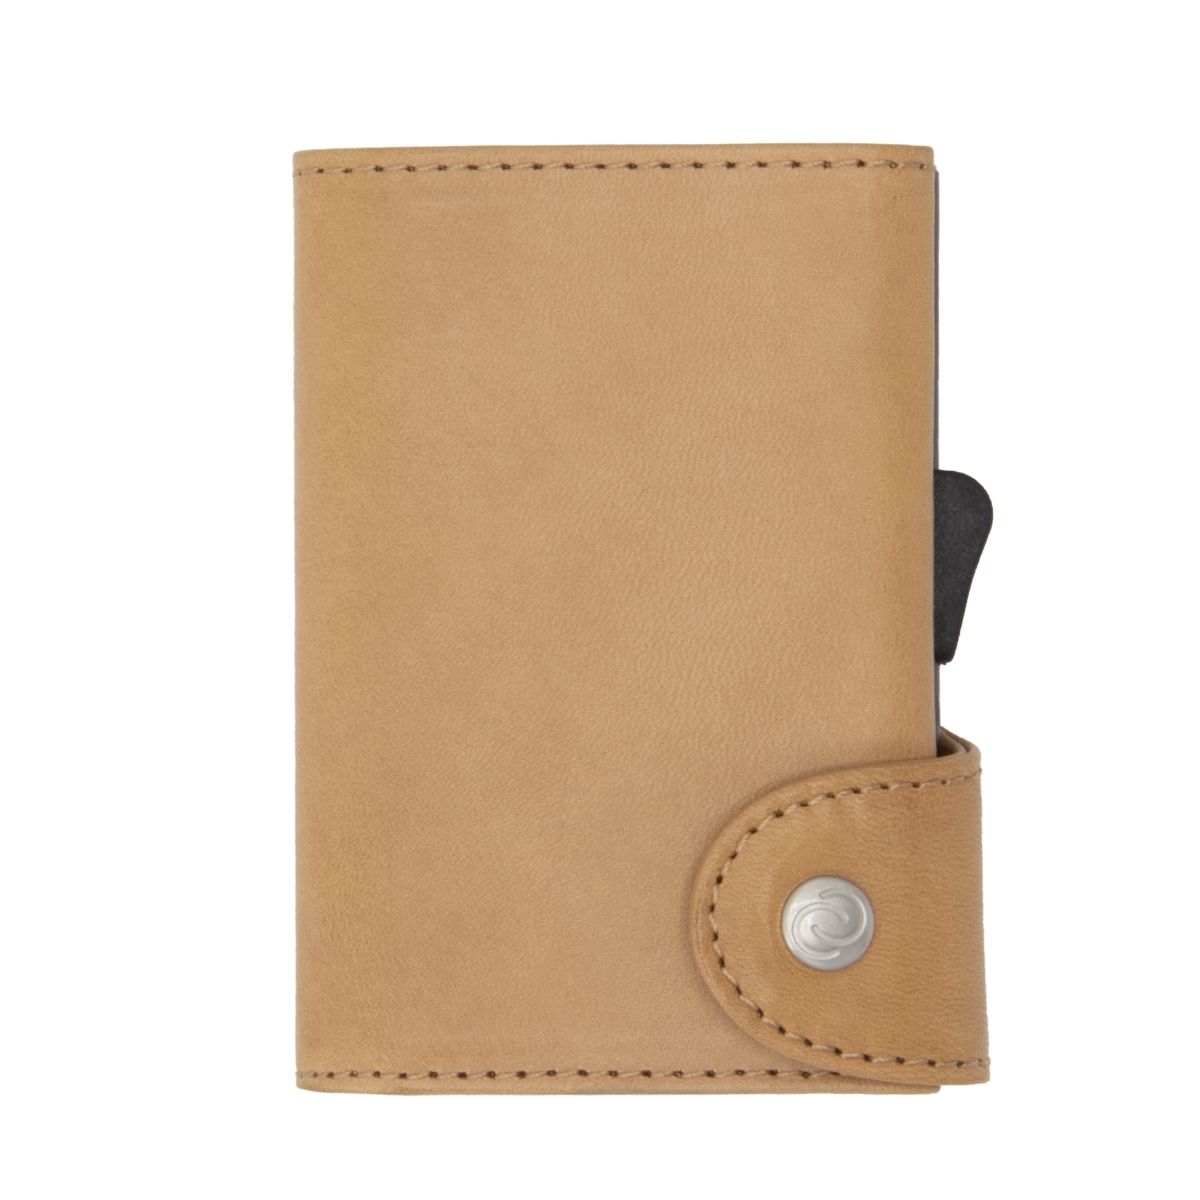 C-Secure Aluminum Card Holder with Genuine Leather and Coin Pouch - Saddle